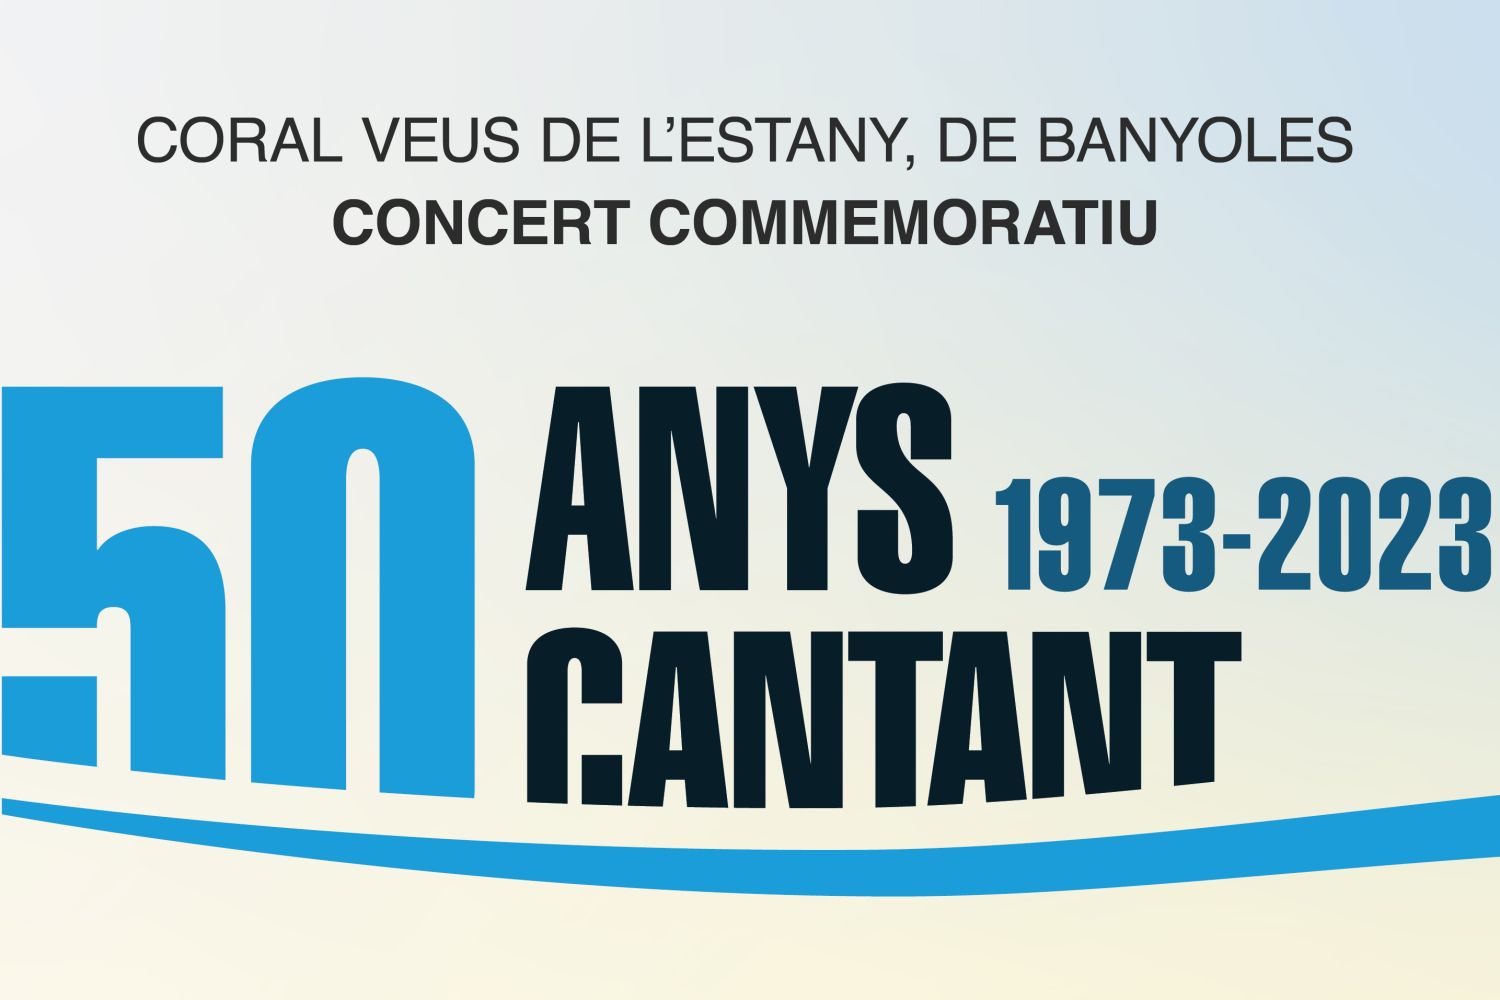 50 anys cantant!